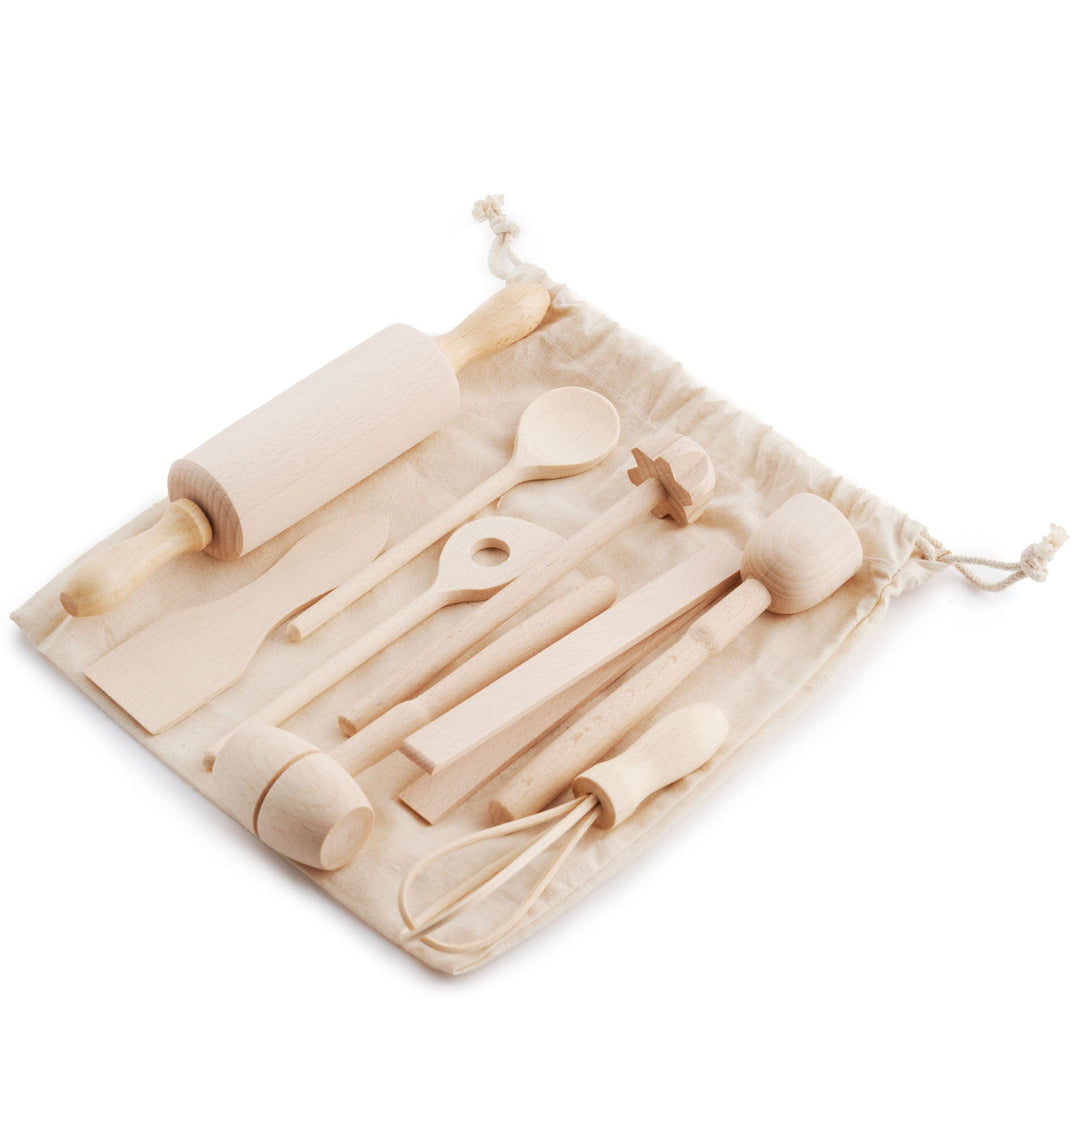 Eco Living Pretend Professions & Role Playing Mini Wooden Kitchen Utensils Set